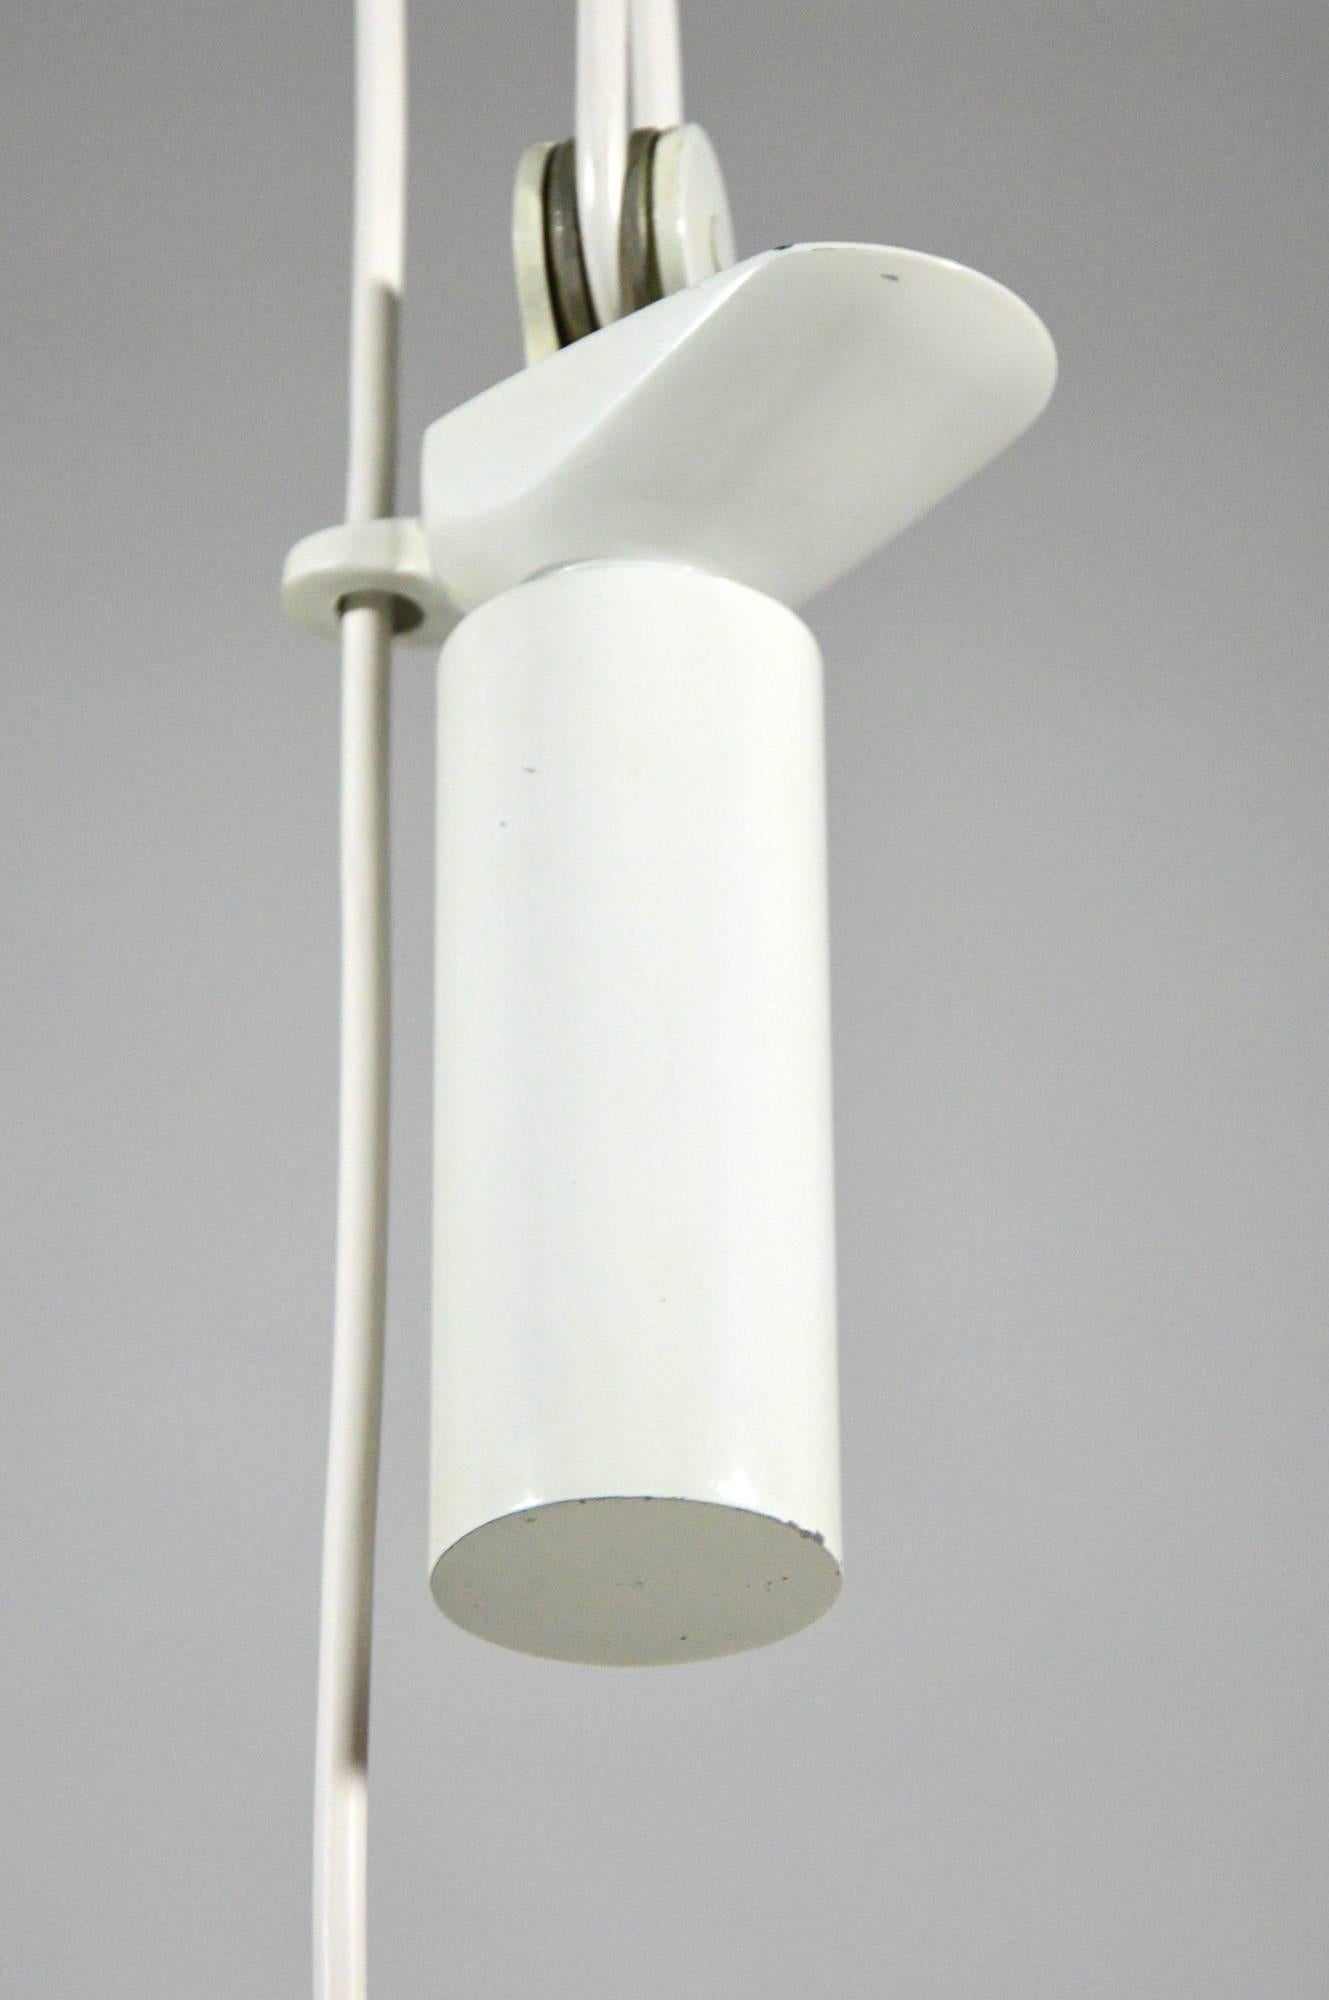 Flos Splügen Bräu Pendant Lamp with Counterweight by A. and P. G. Castiglioni 3